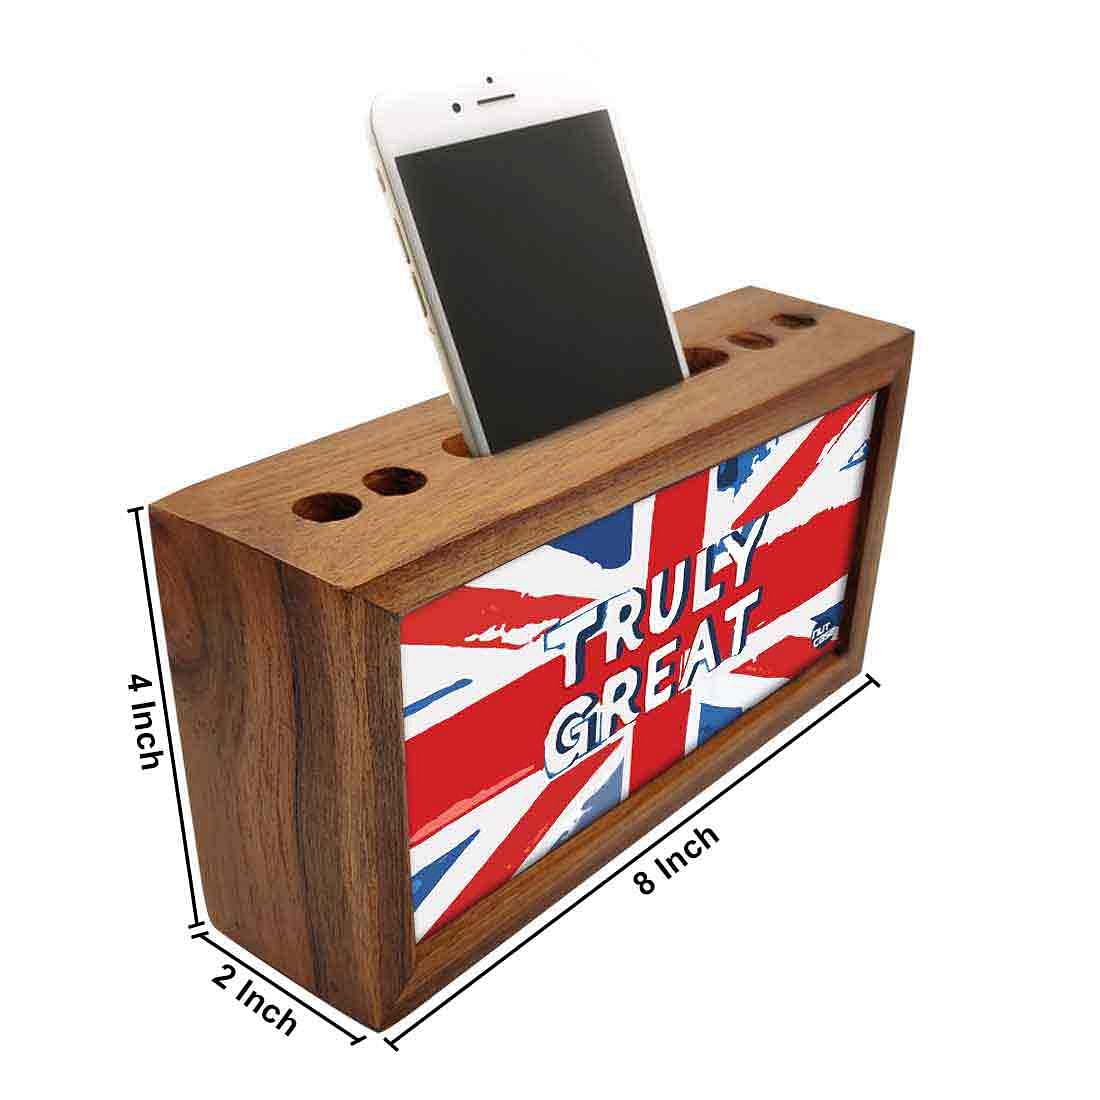 Wood Phone and Pen Stand Desk Organizer for Office - Truly Great Nutcase